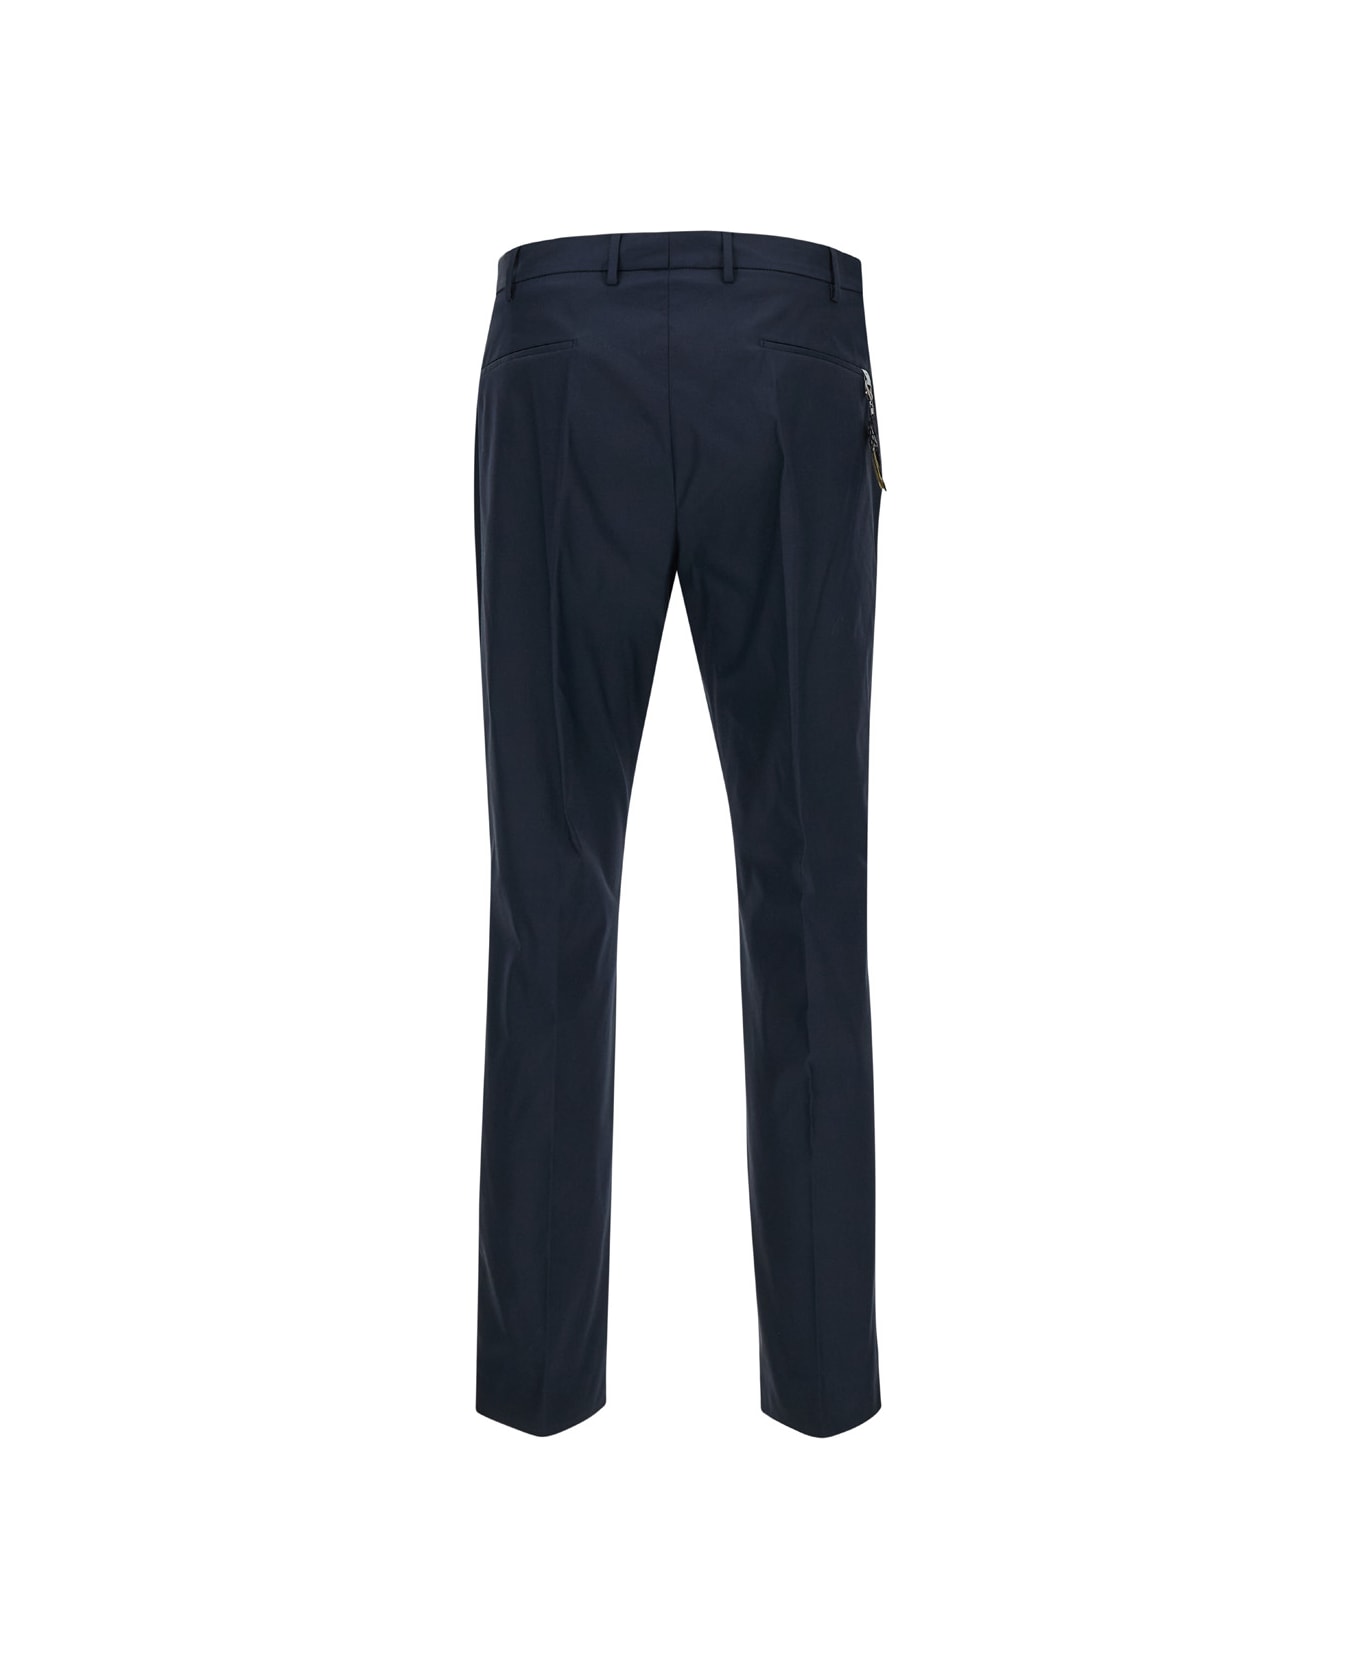 PT01 Blue Slim Fit Tailored Trousers In Cotton Blend Man - Blu ボトムス